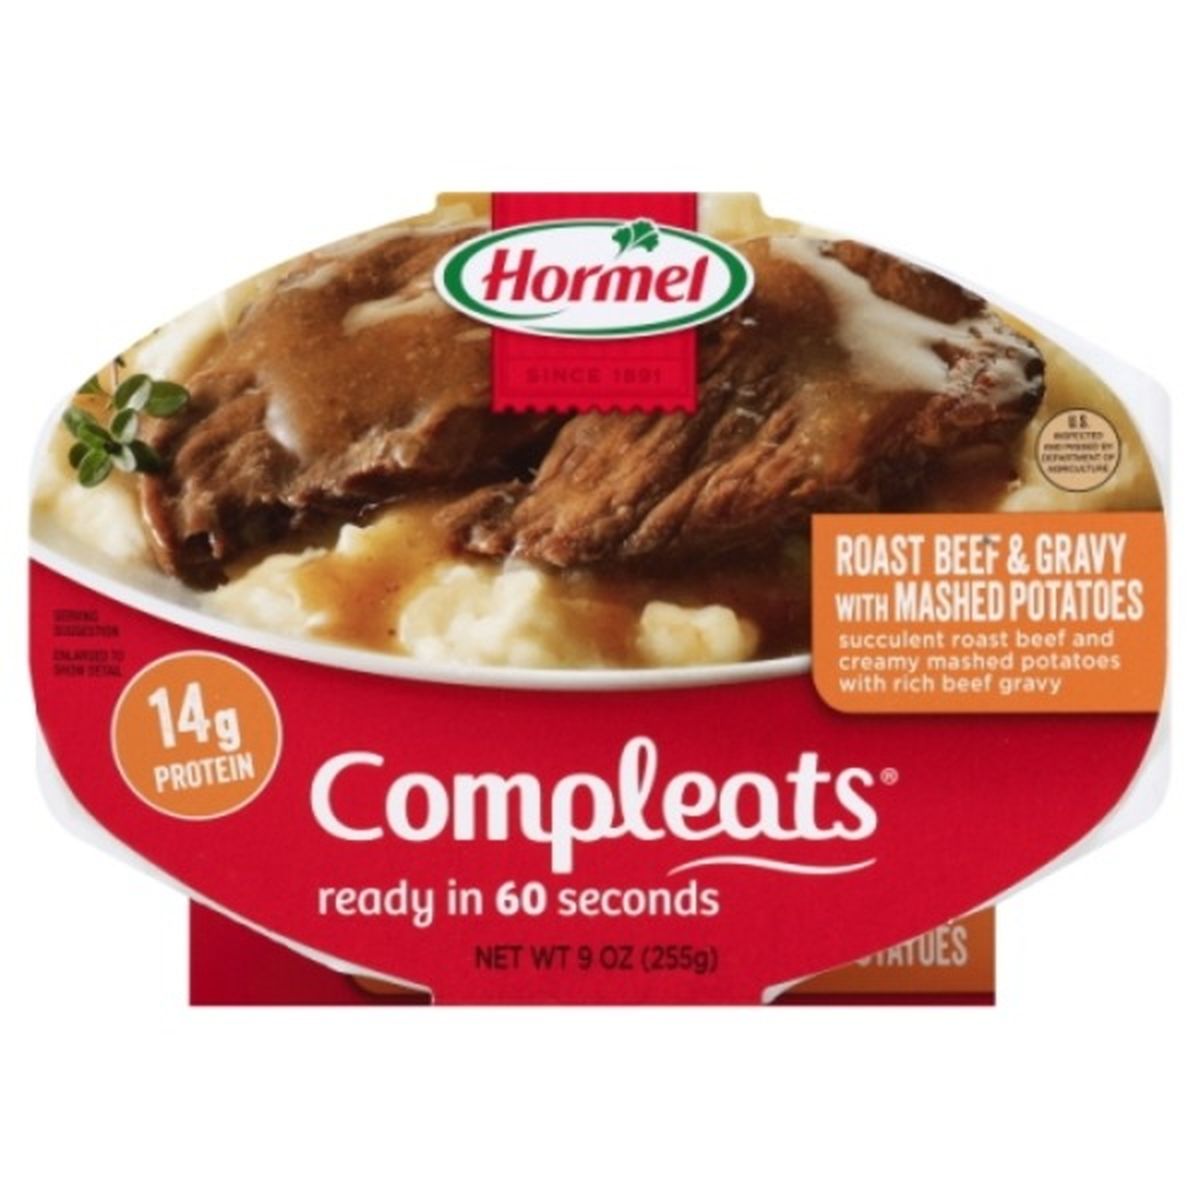 Calories in Hormel Compleats Roast Beef & Gravy, with Mashed Potatoes